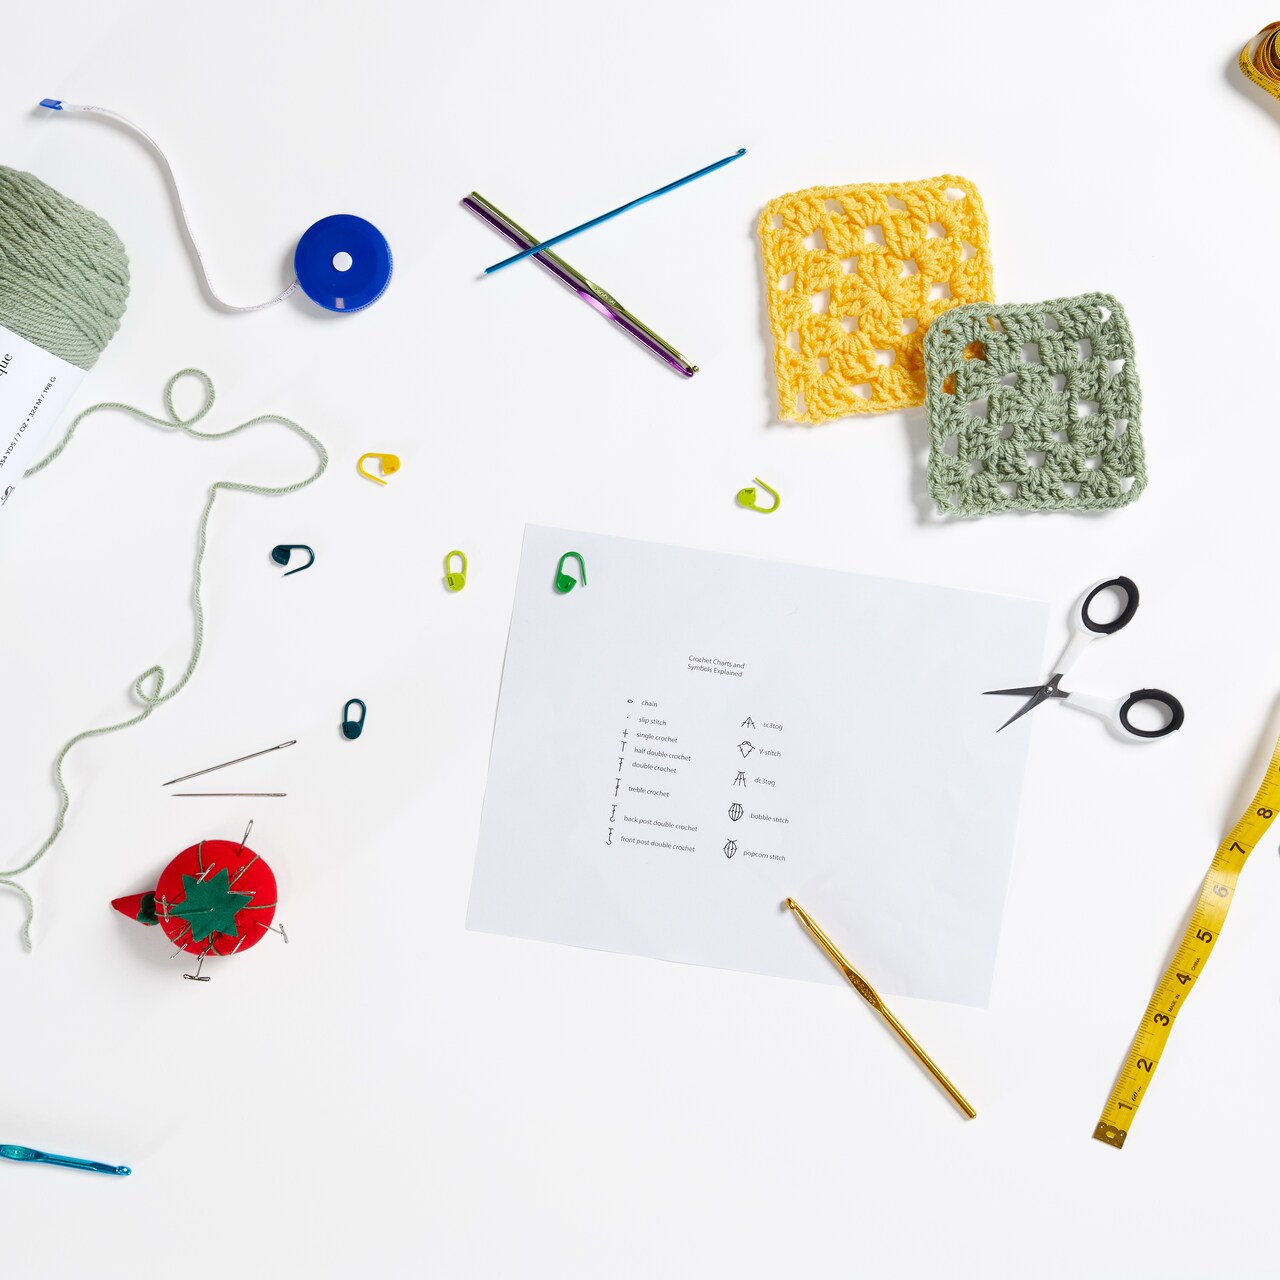 Crochet Charts and Symbols Explained with Liz Salazar